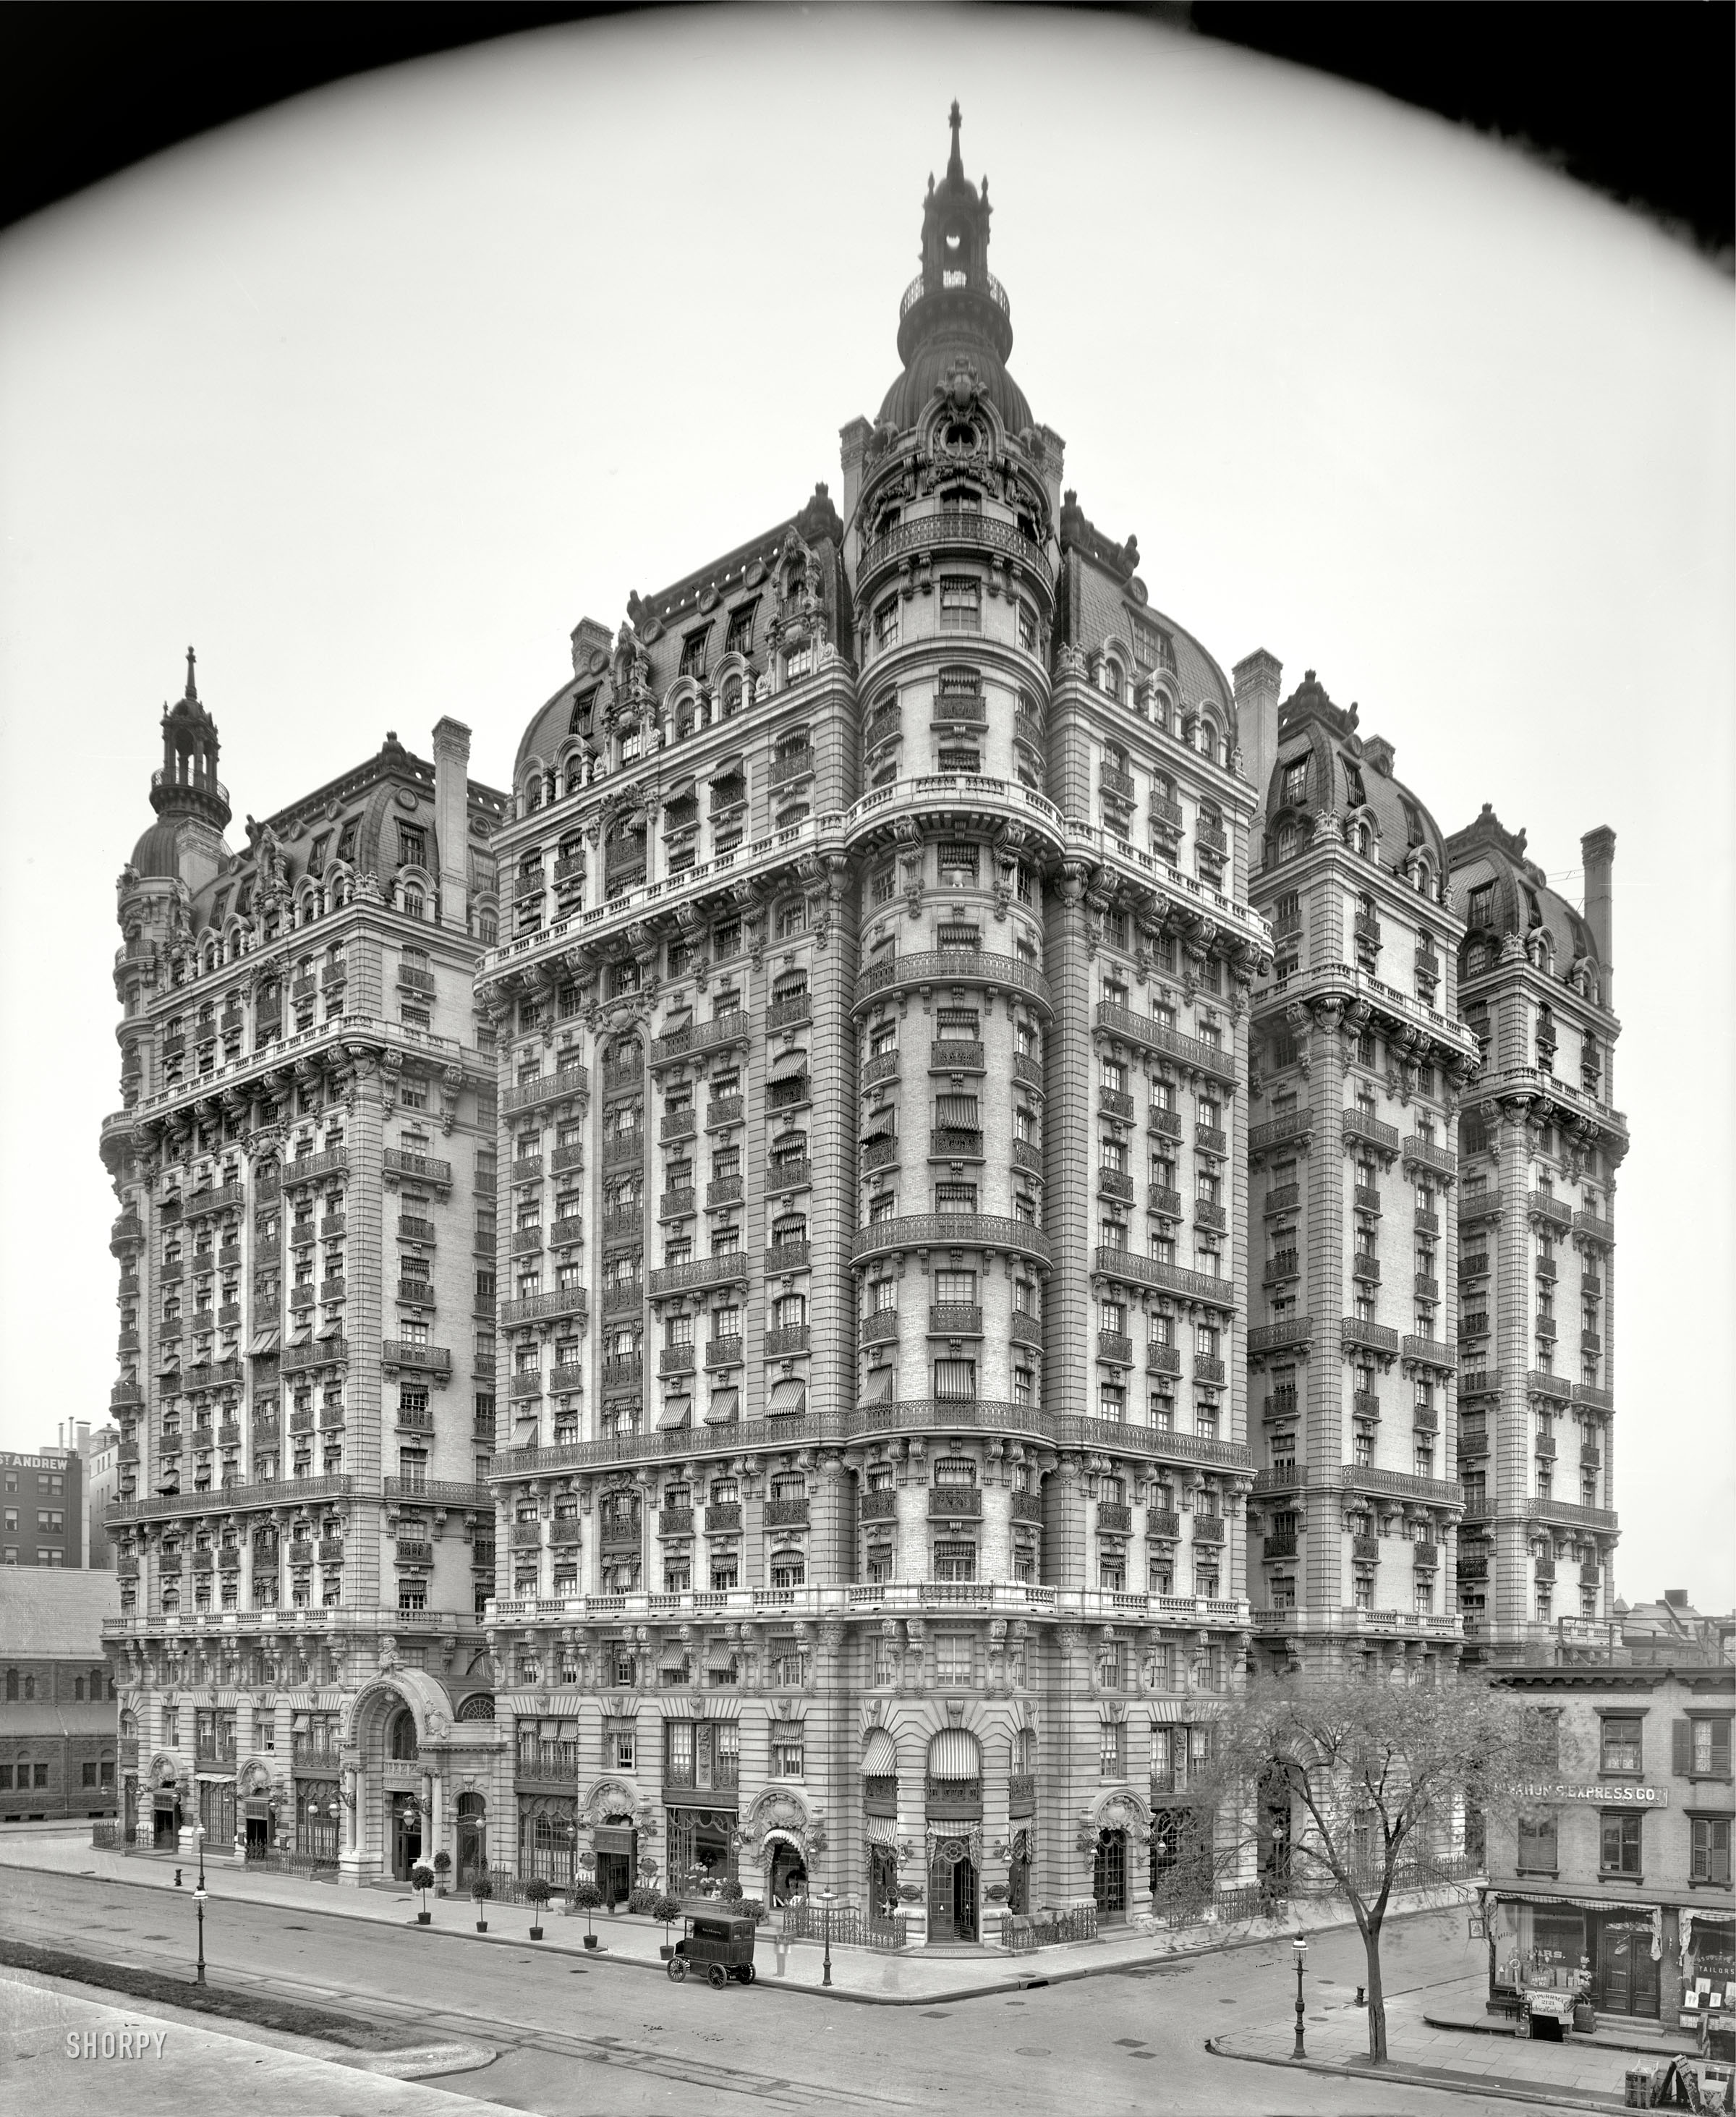 Circa 1906. "Ansonia Apartments, Broadway, New York City." 8x10 inch dry plate glass negative, Detroit Publishing Company. View full size.